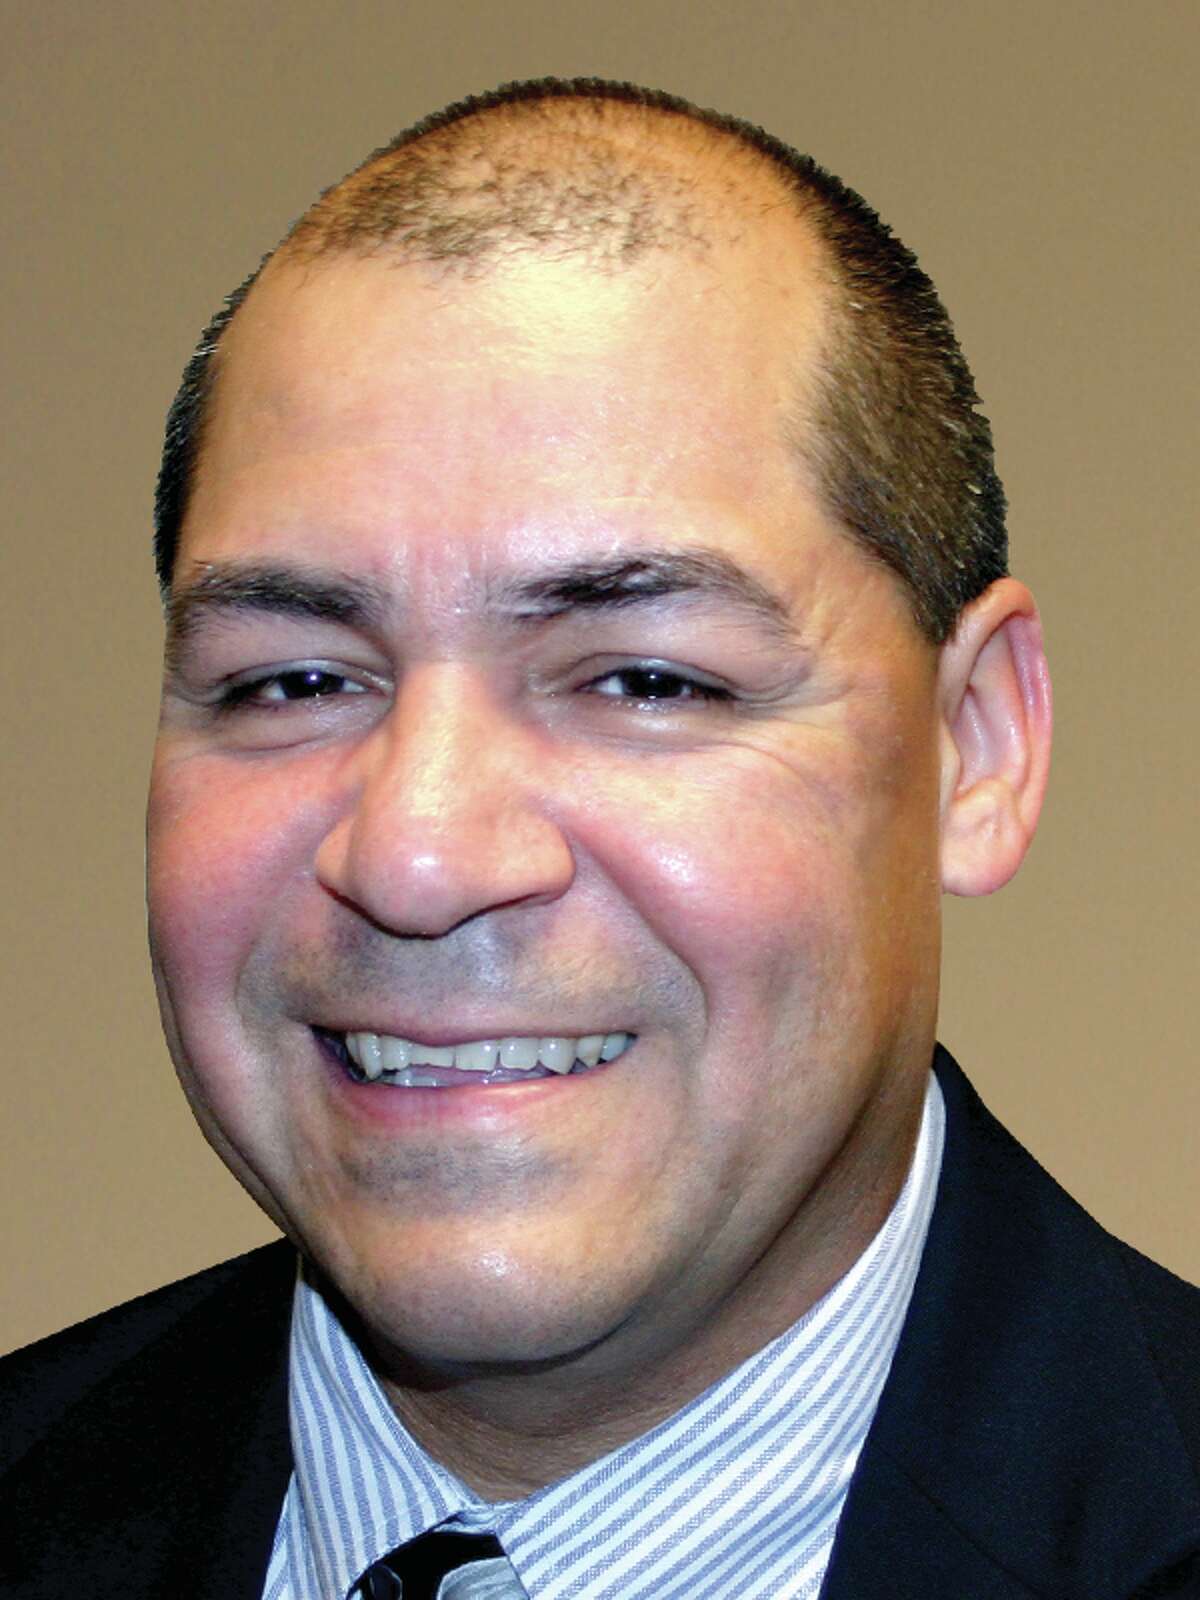 Lucio Calzada is the new assistant superintendent of human resources at Spring Independent School District.